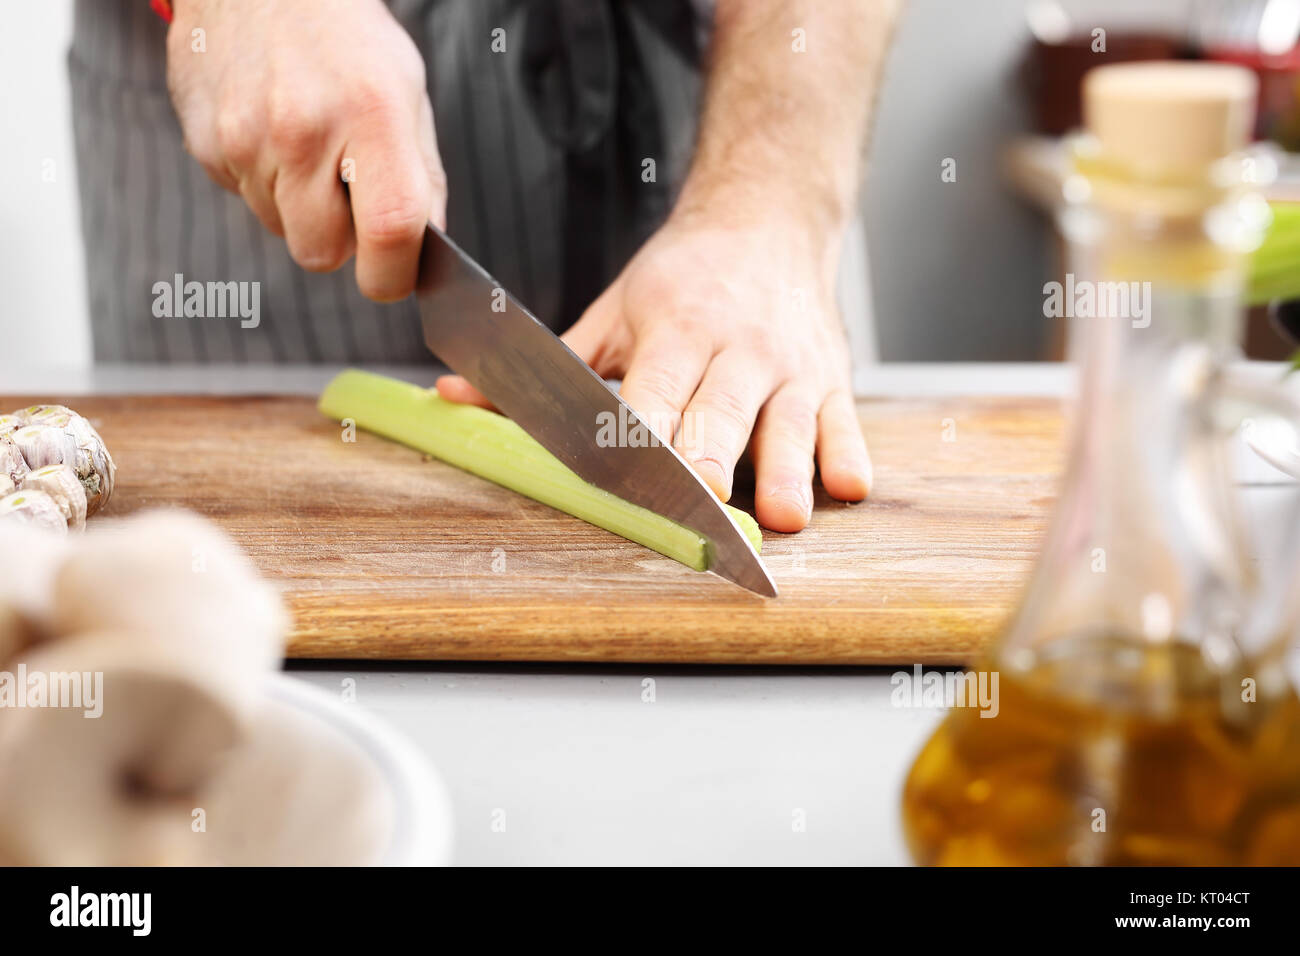 cutting vegetables. slicing knife vegetables. cook chopped vegetables on a chopping board. Stock Photo